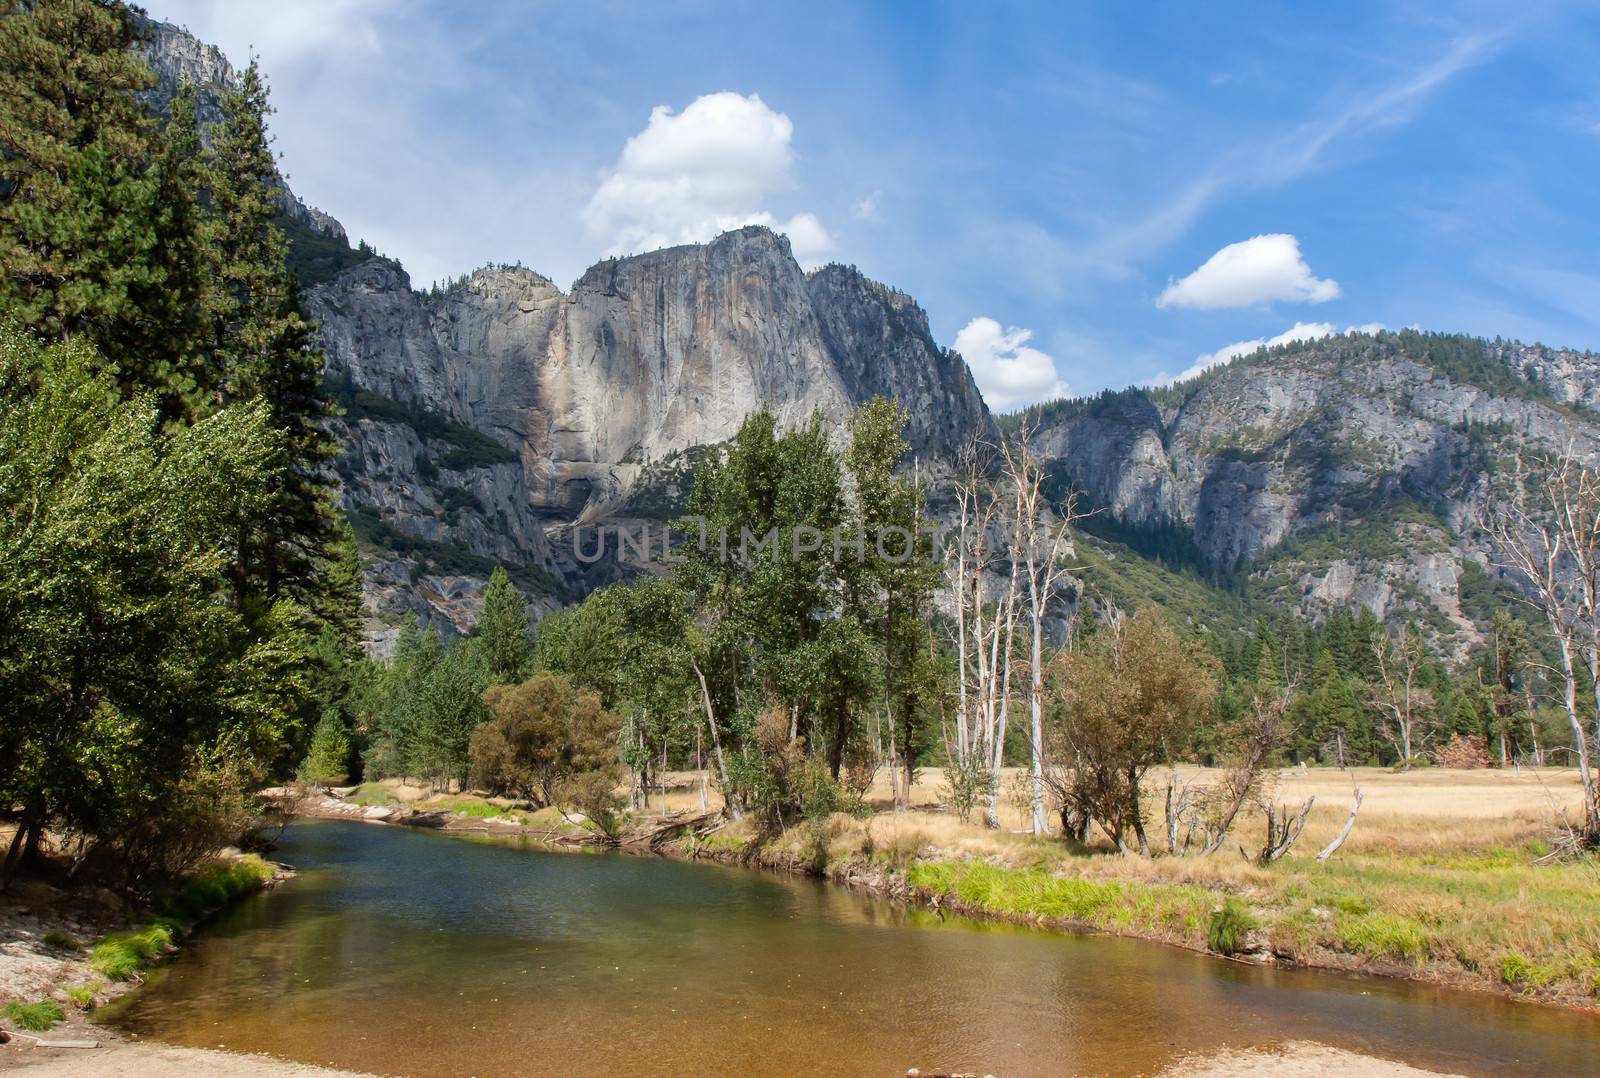 The Merced River threads through Yosemite National Park. This image shows a stretch flowing through Yosemite valley.